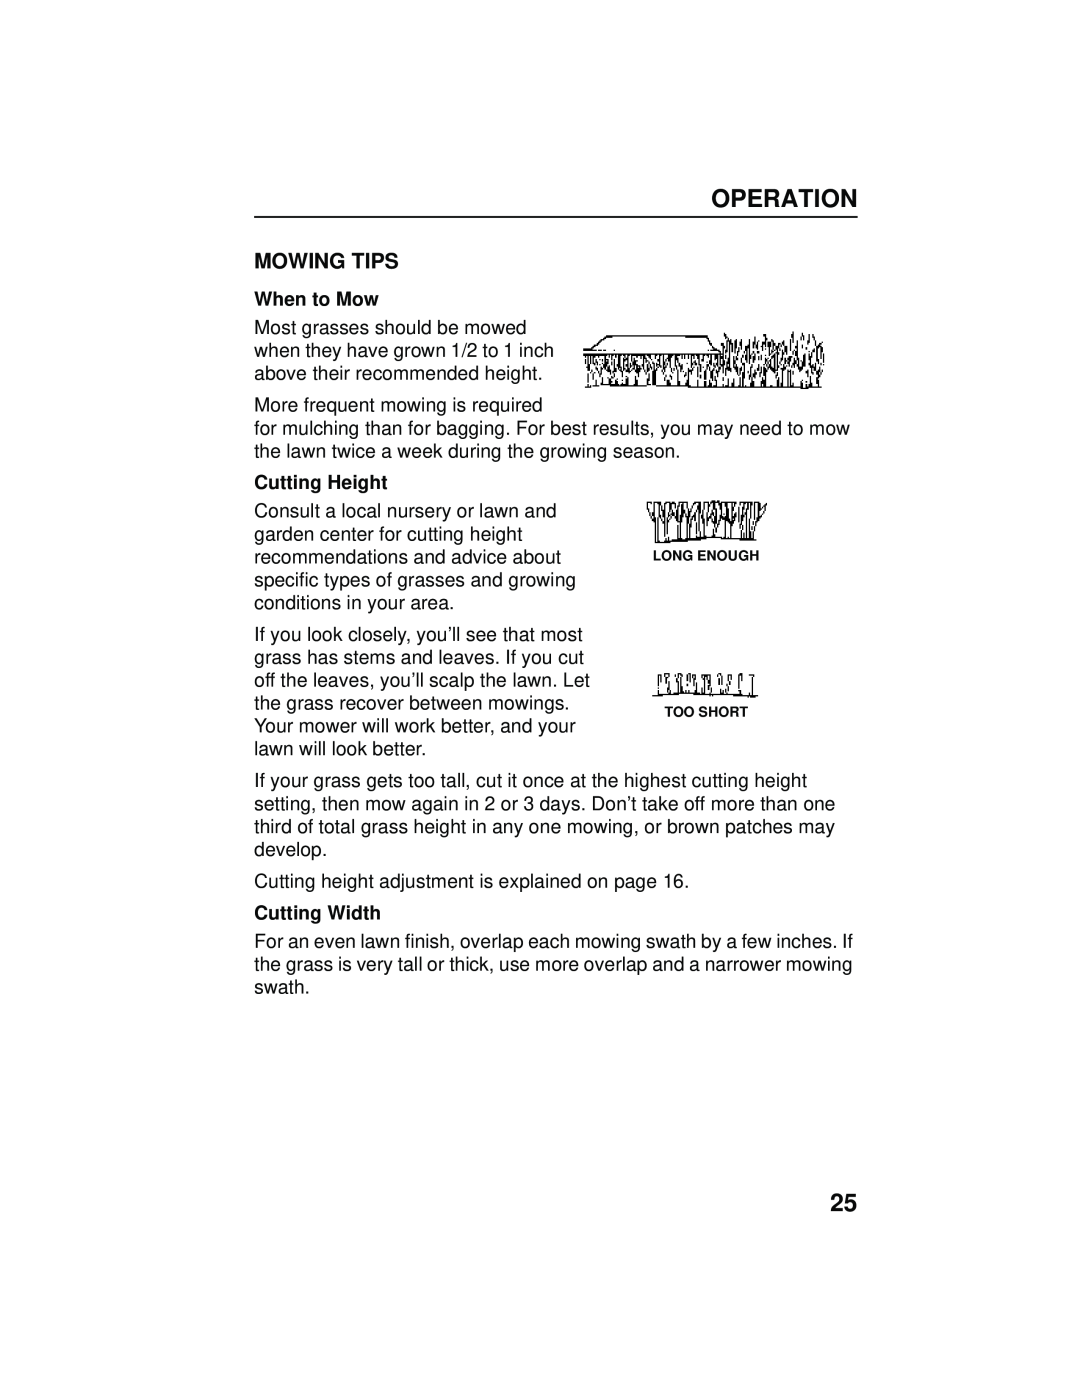 Honda Power Equipment HRB216TXA owner manual Mowing Tips, When to Mow, Cutting Width, Operation, Cutting Height 